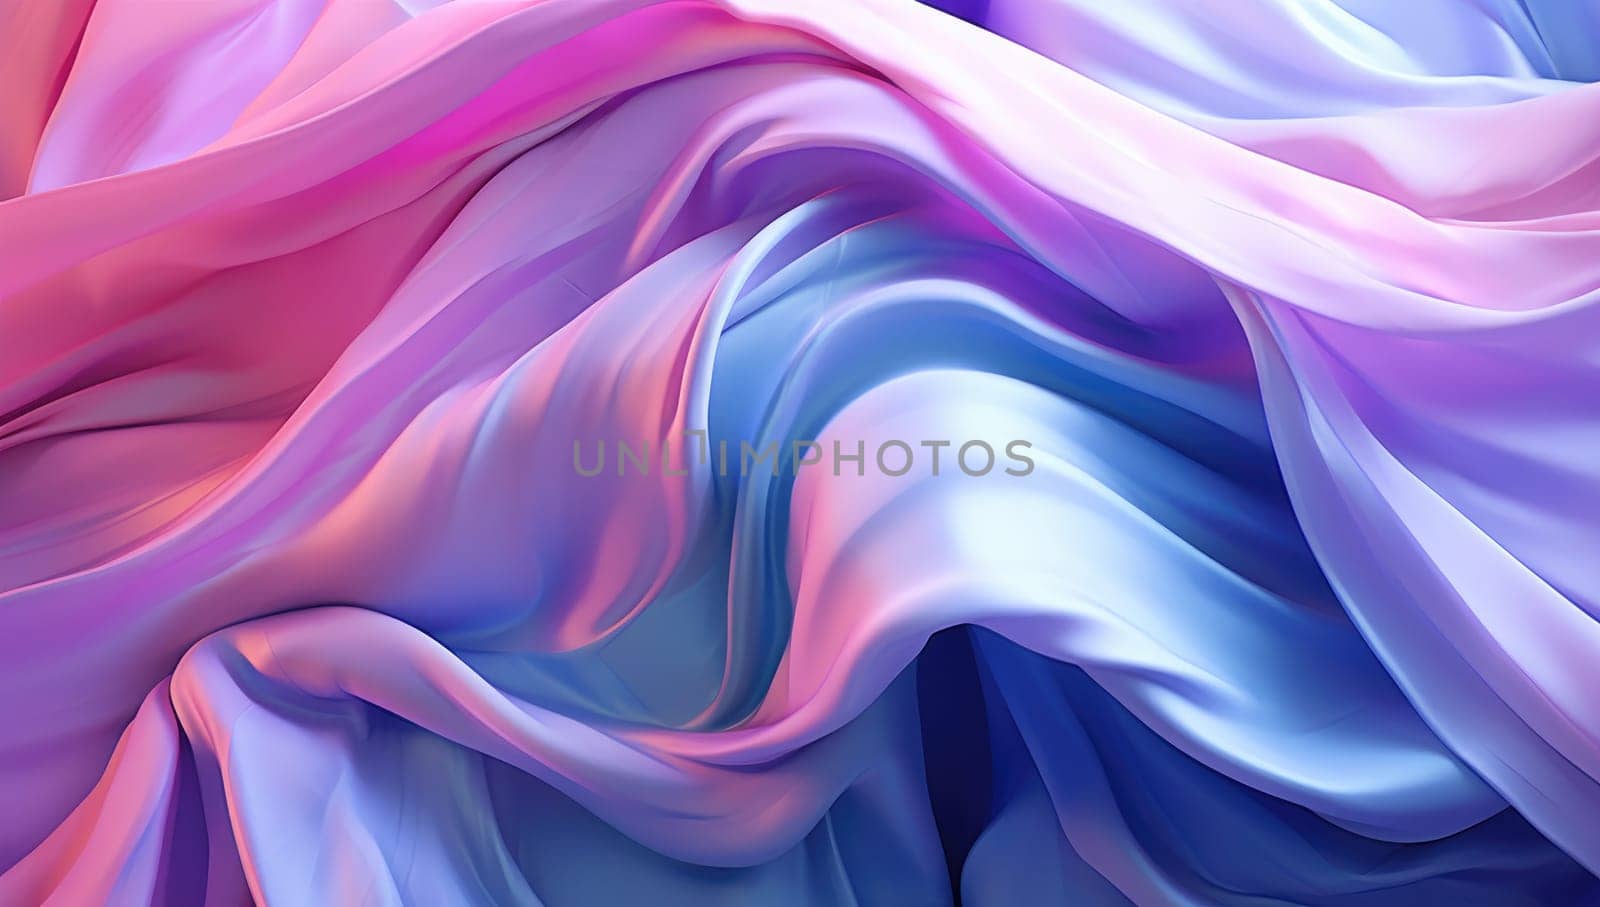 Beautiful background. Soft, clean lines of fabric or plastic